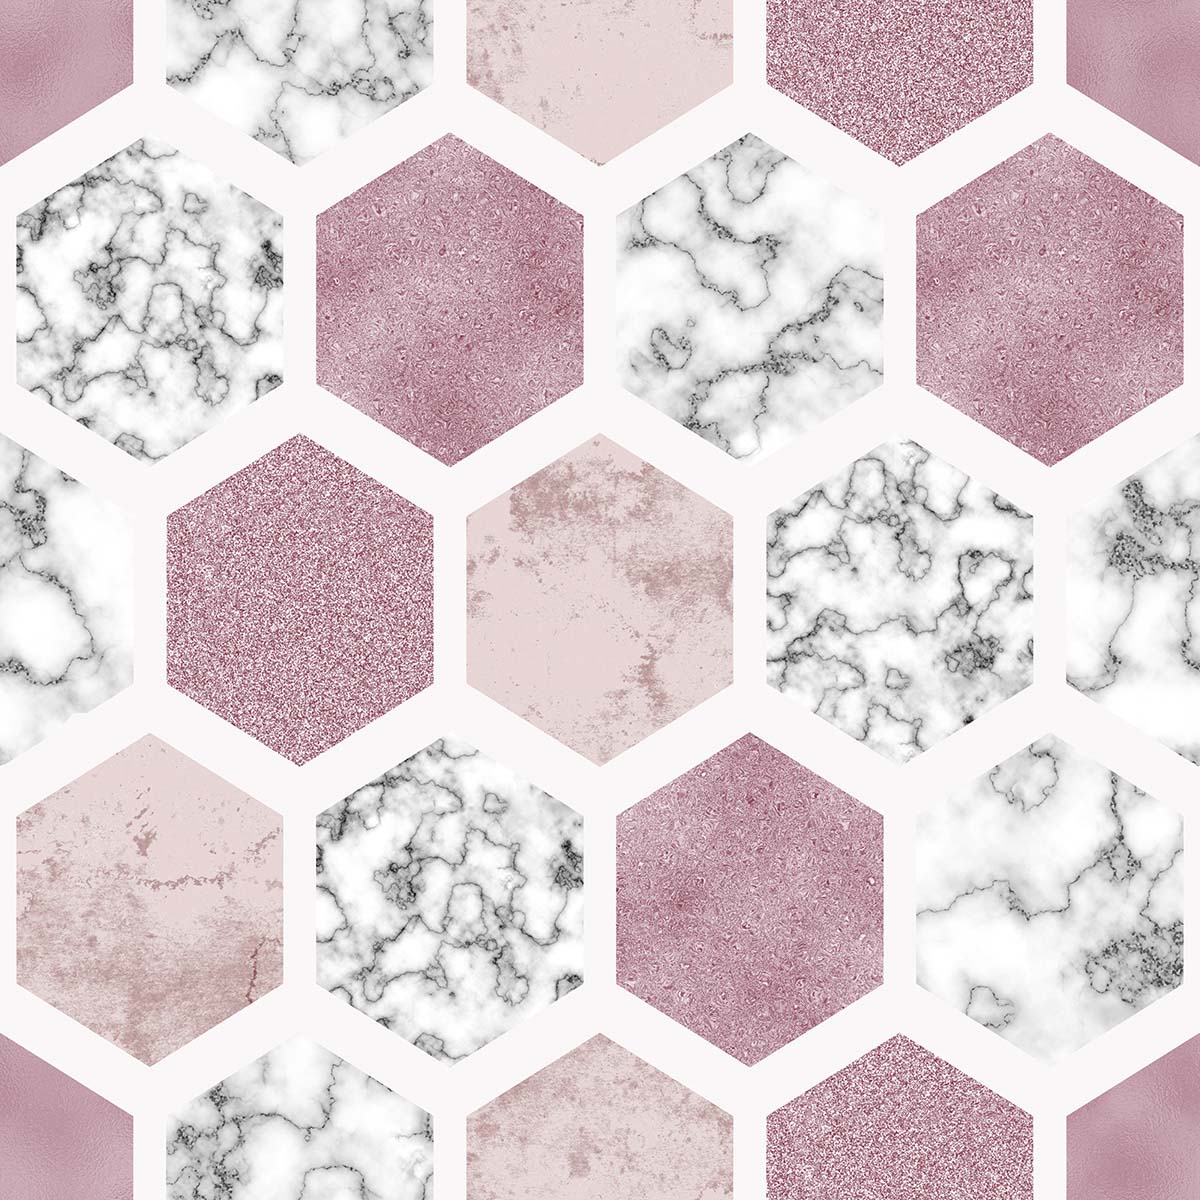 A pattern of pink and white hexagons